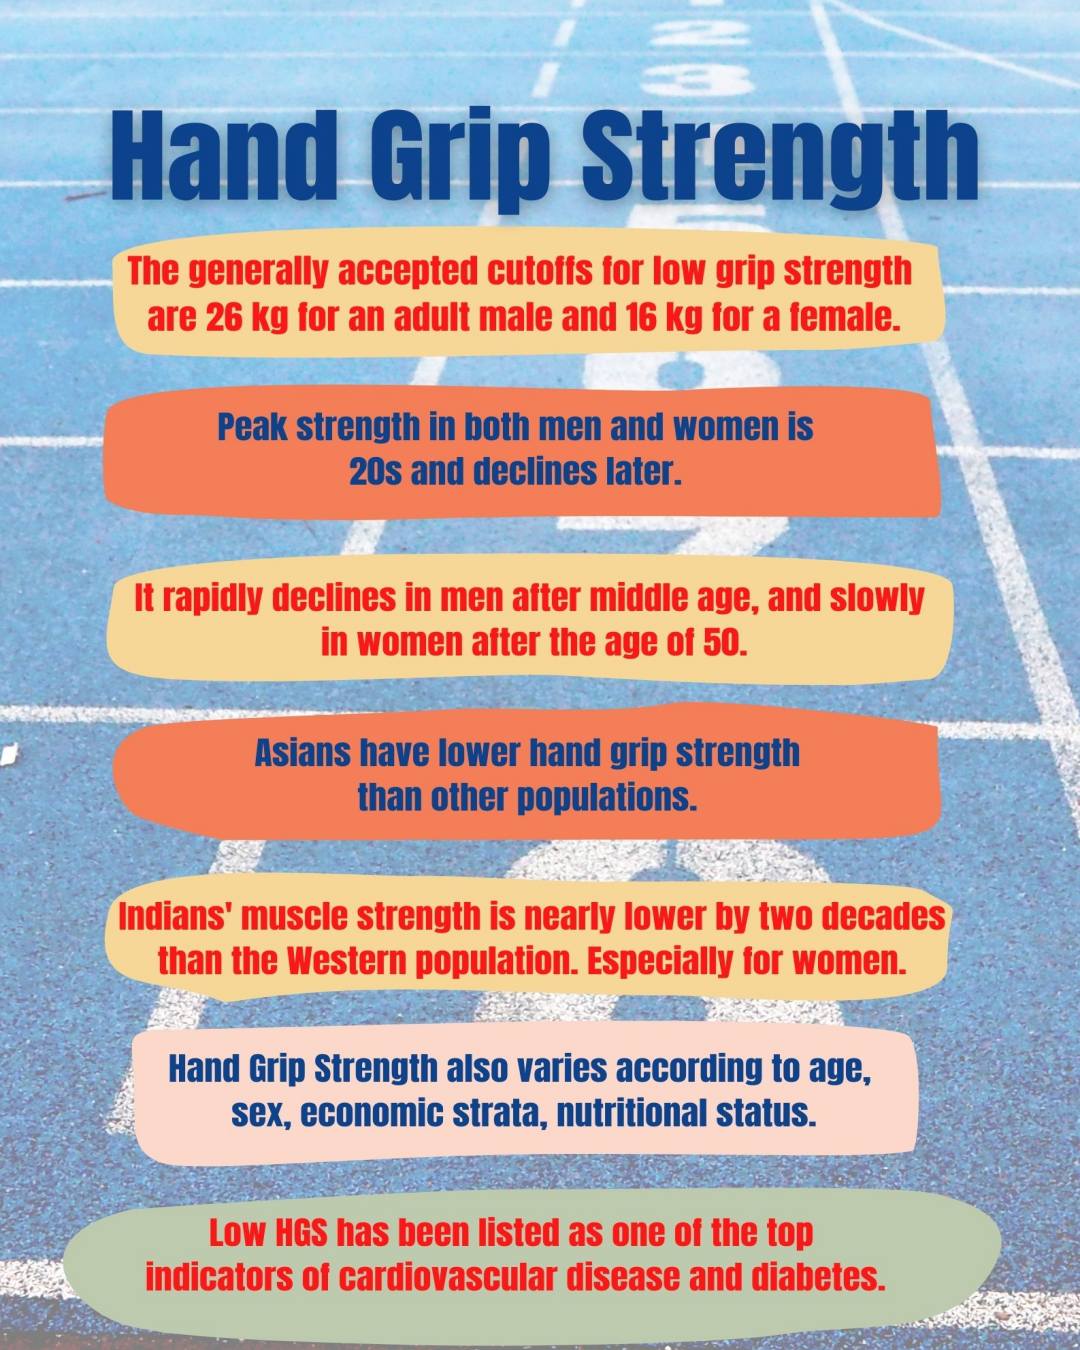 Researchers say the amount of force we can muster with our hands is a good representation of how healthy our body is. The Hand Grip Strength (HGS) represents the total body strength, which is a good measure of healthy aging and overall physical capabilities, and needs to be checked by doctors with other vitals like blood pressure and weight